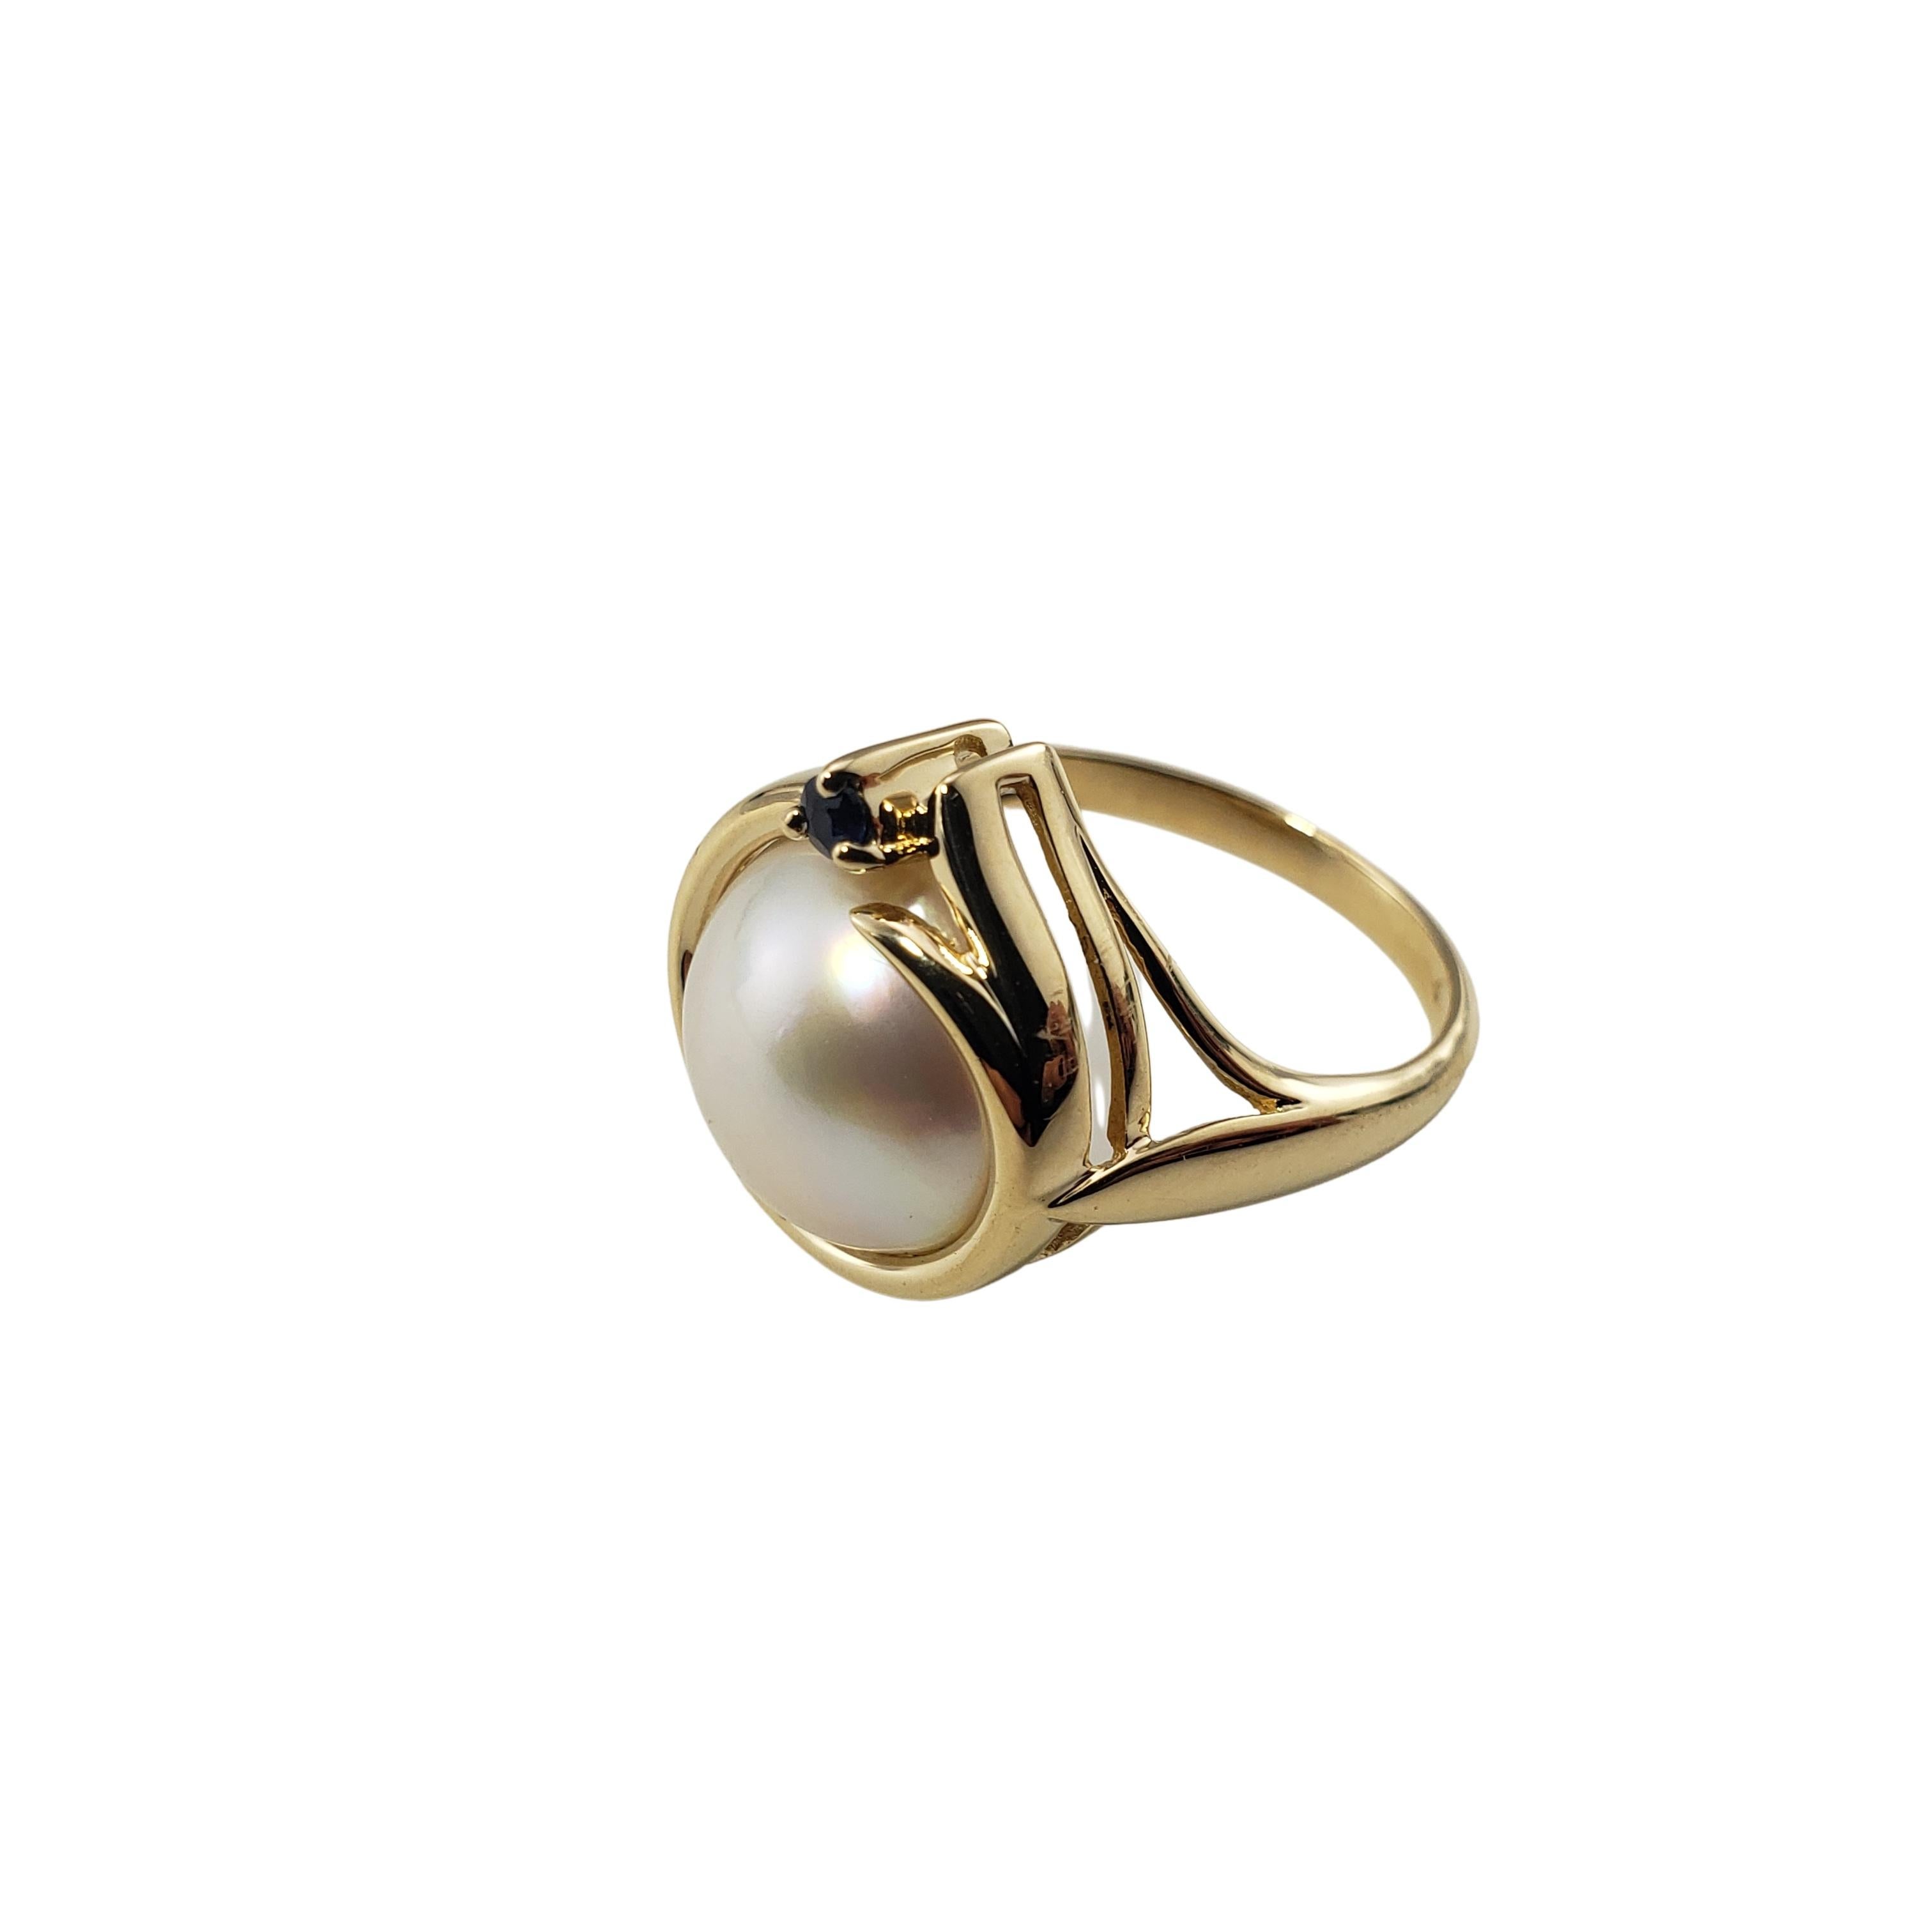 Women's Vintage 14 Karat Mabe Pearl and Sapphire Ring